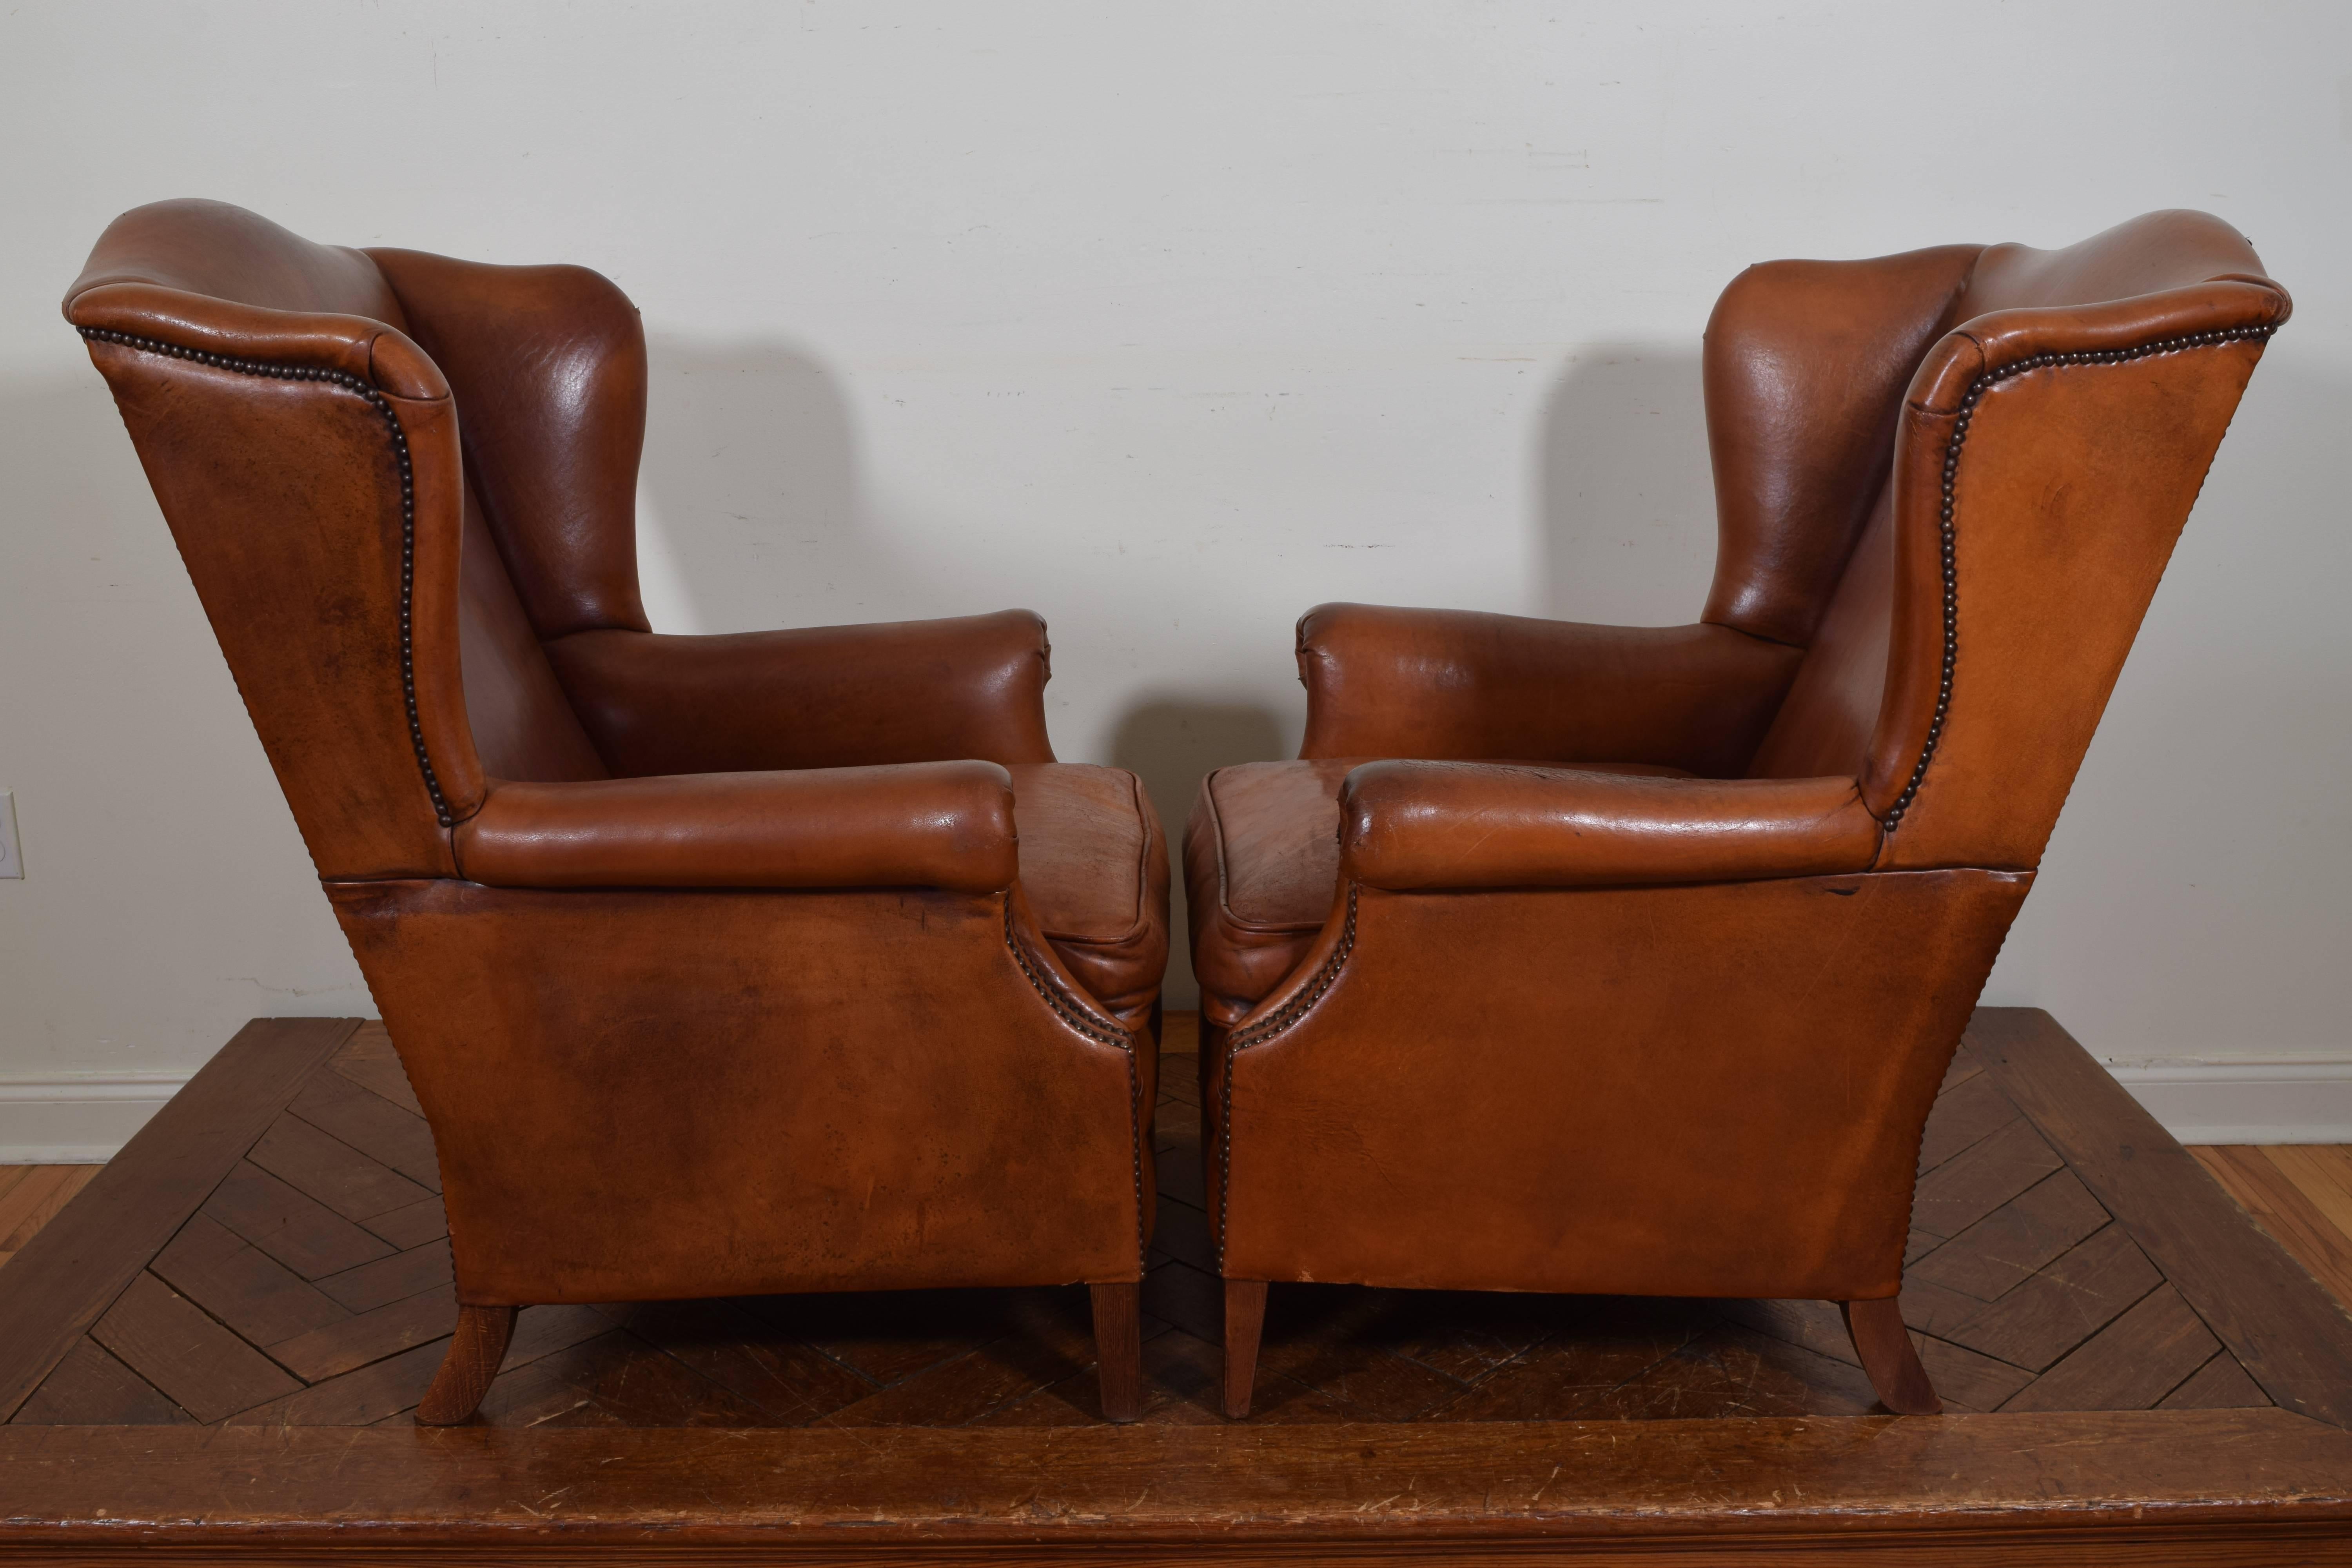 Mid-20th Century French Pair of Chestnut Leather Wing Chairs, Second Quarter of the 20th Century